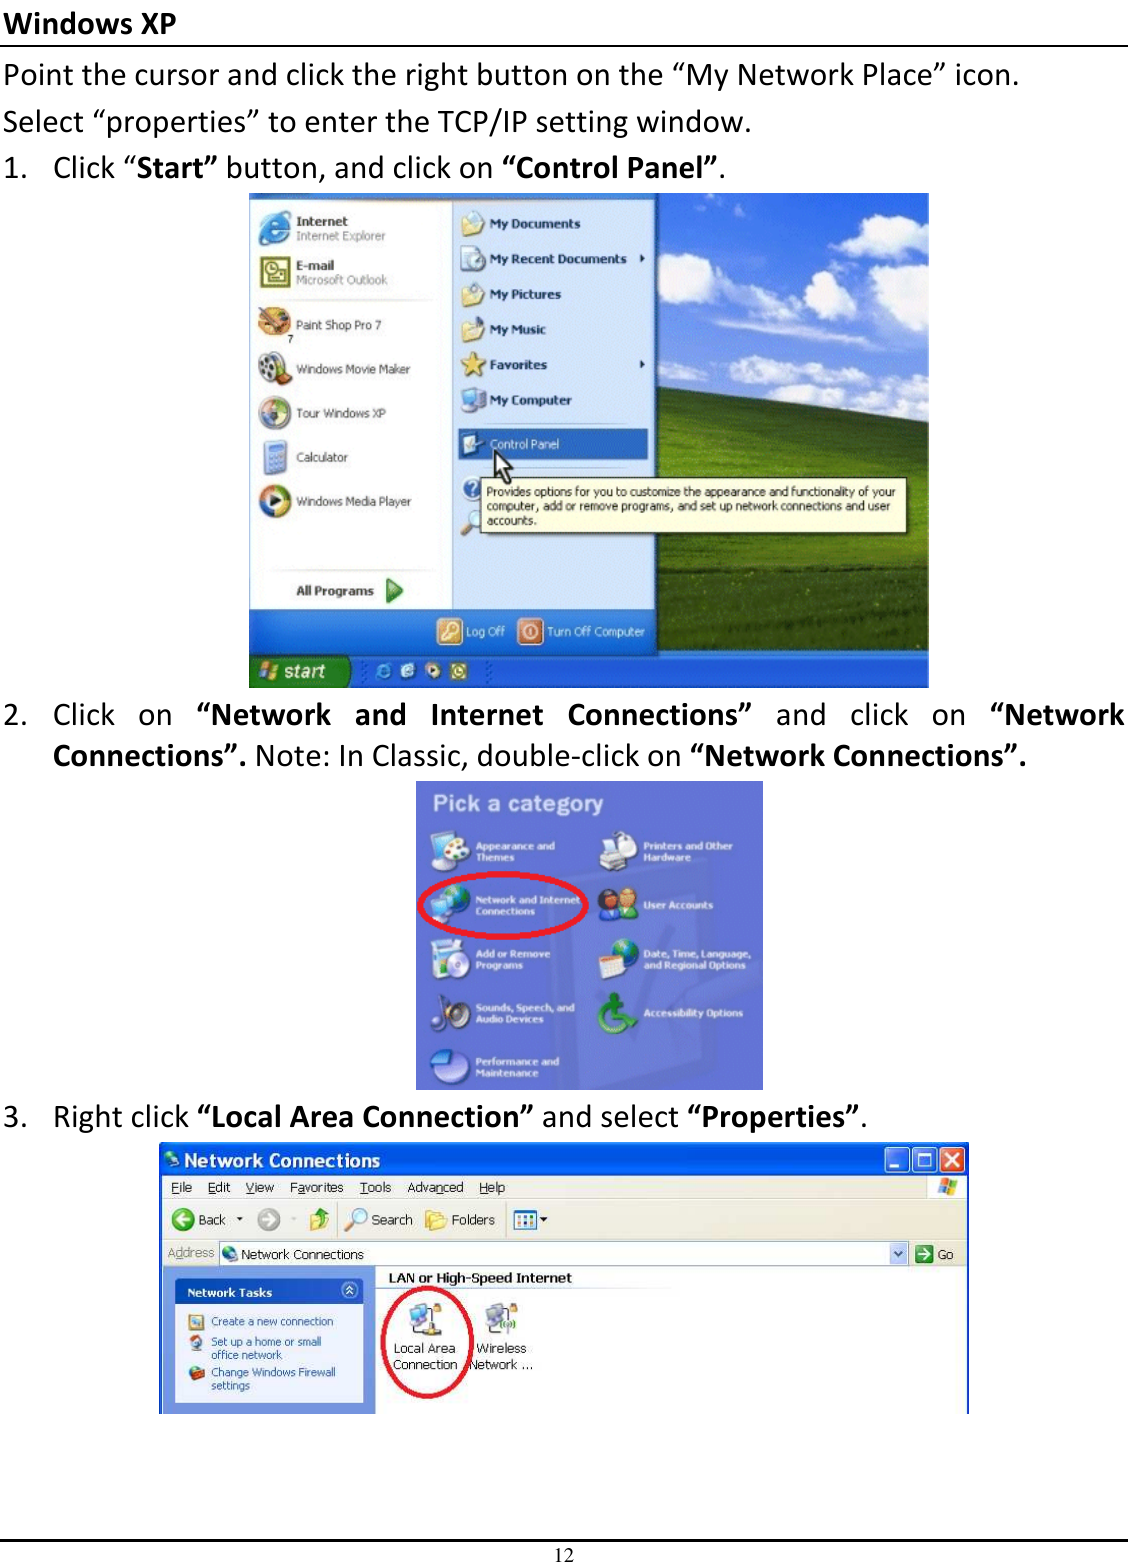 12 Windows XP   Point the cursor and click the right button on the “My Network Place” icon. Select “properties” to enter the TCP/IP setting window. 1. Click “Start” button, and click on “Control Panel”.  2. Click  on  “Network  and  Internet  Connections”  and  click  on  “Network Connections”. Note: In Classic, double-click on “Network Connections”.  3. Right click “Local Area Connection” and select “Properties”.  